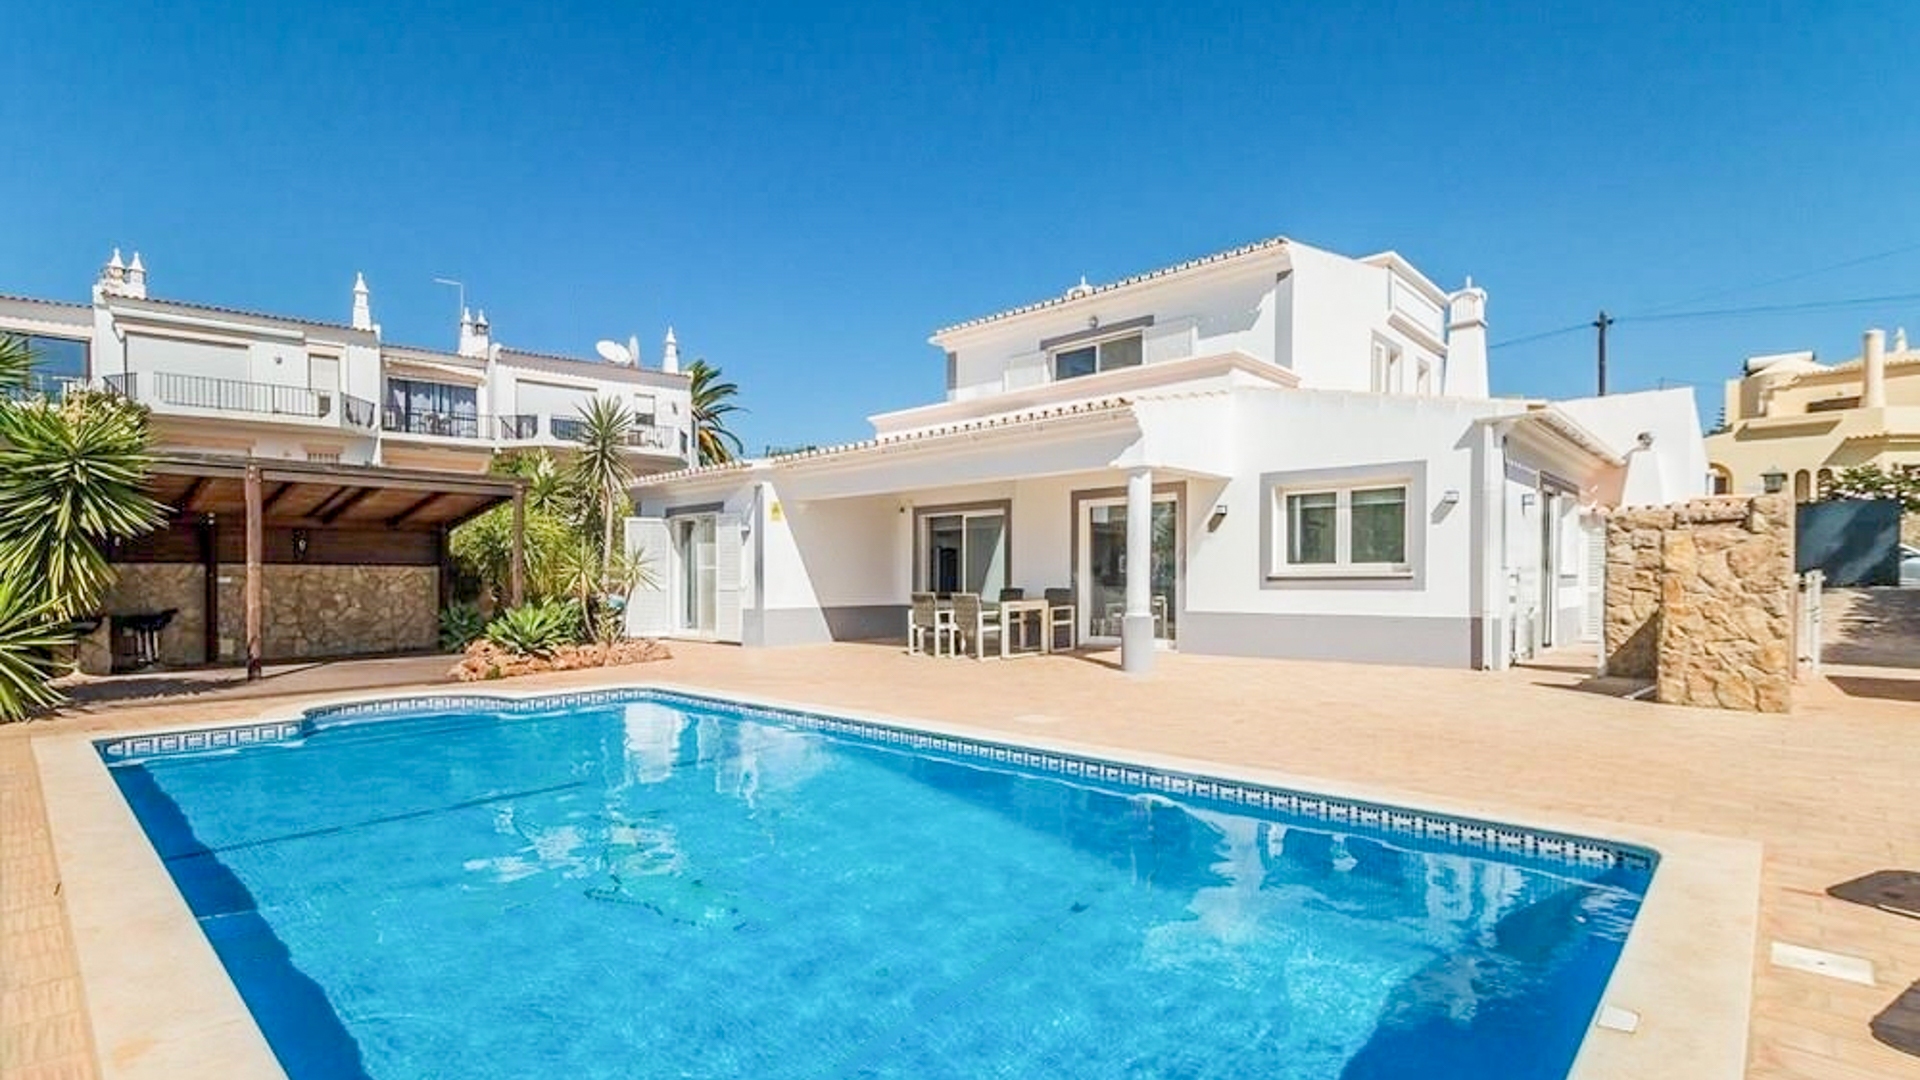 Modern 4 Bedroom Villa with Sea Views in Guia | VM2092 This modern villa has been recently refurbished and is walking distance to the town centre with a variety of restaurants in Guia, Albufeira. The property offers a fresh open feel with a fantastic sea view.